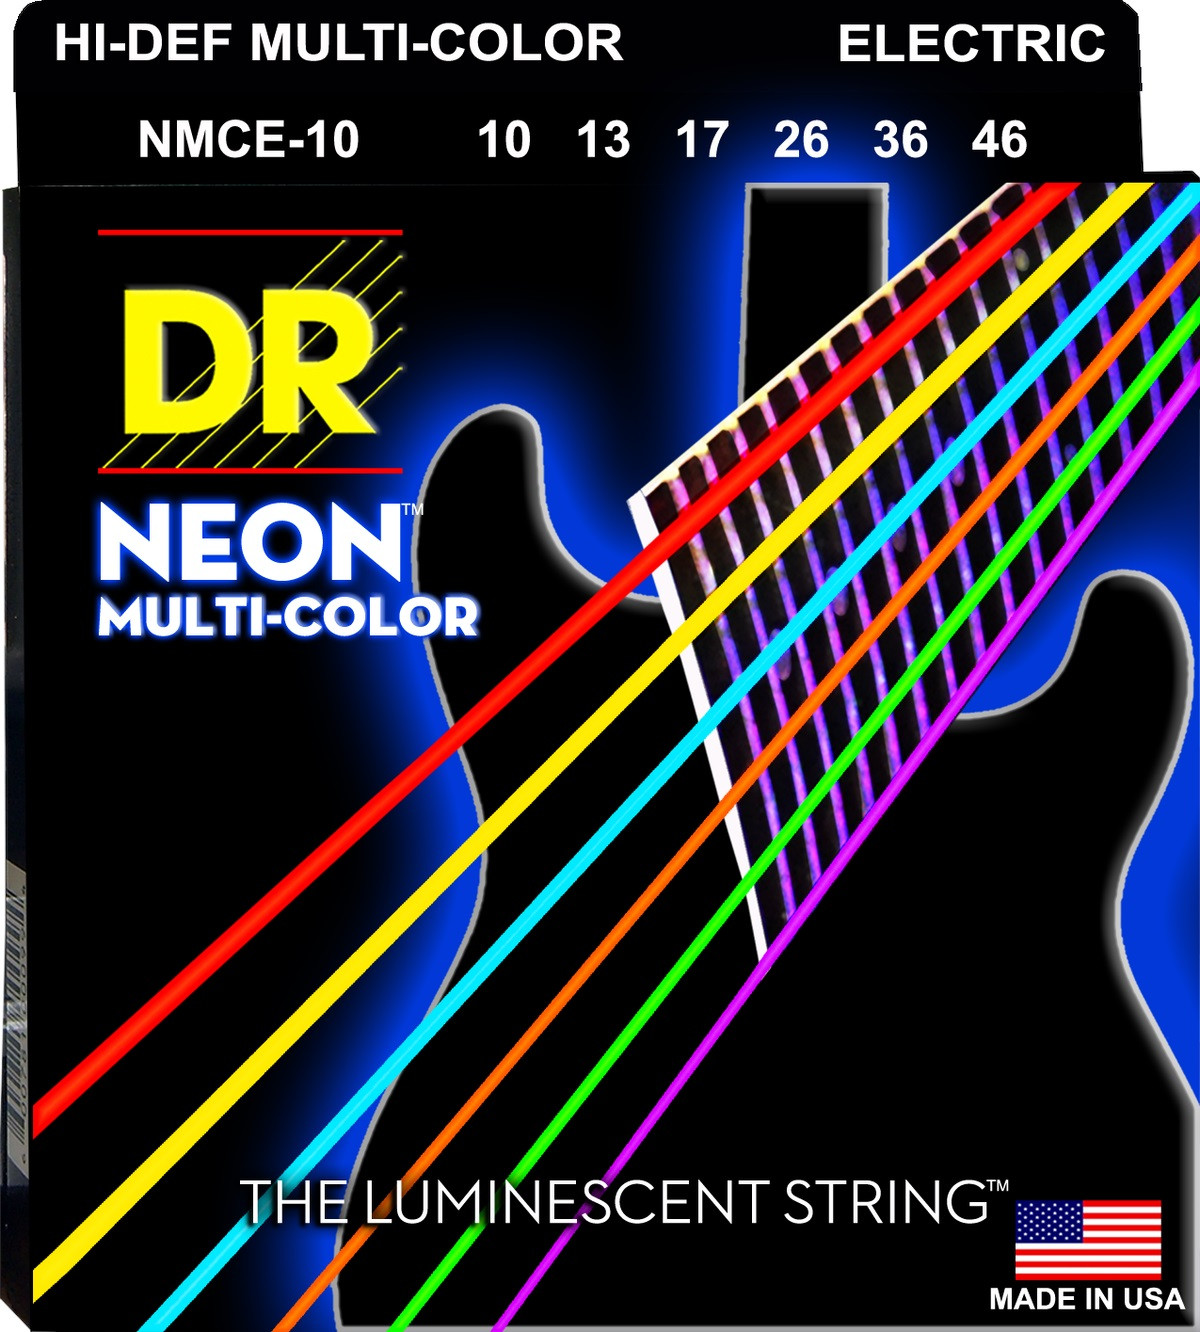 DR Neon Electric 10/46